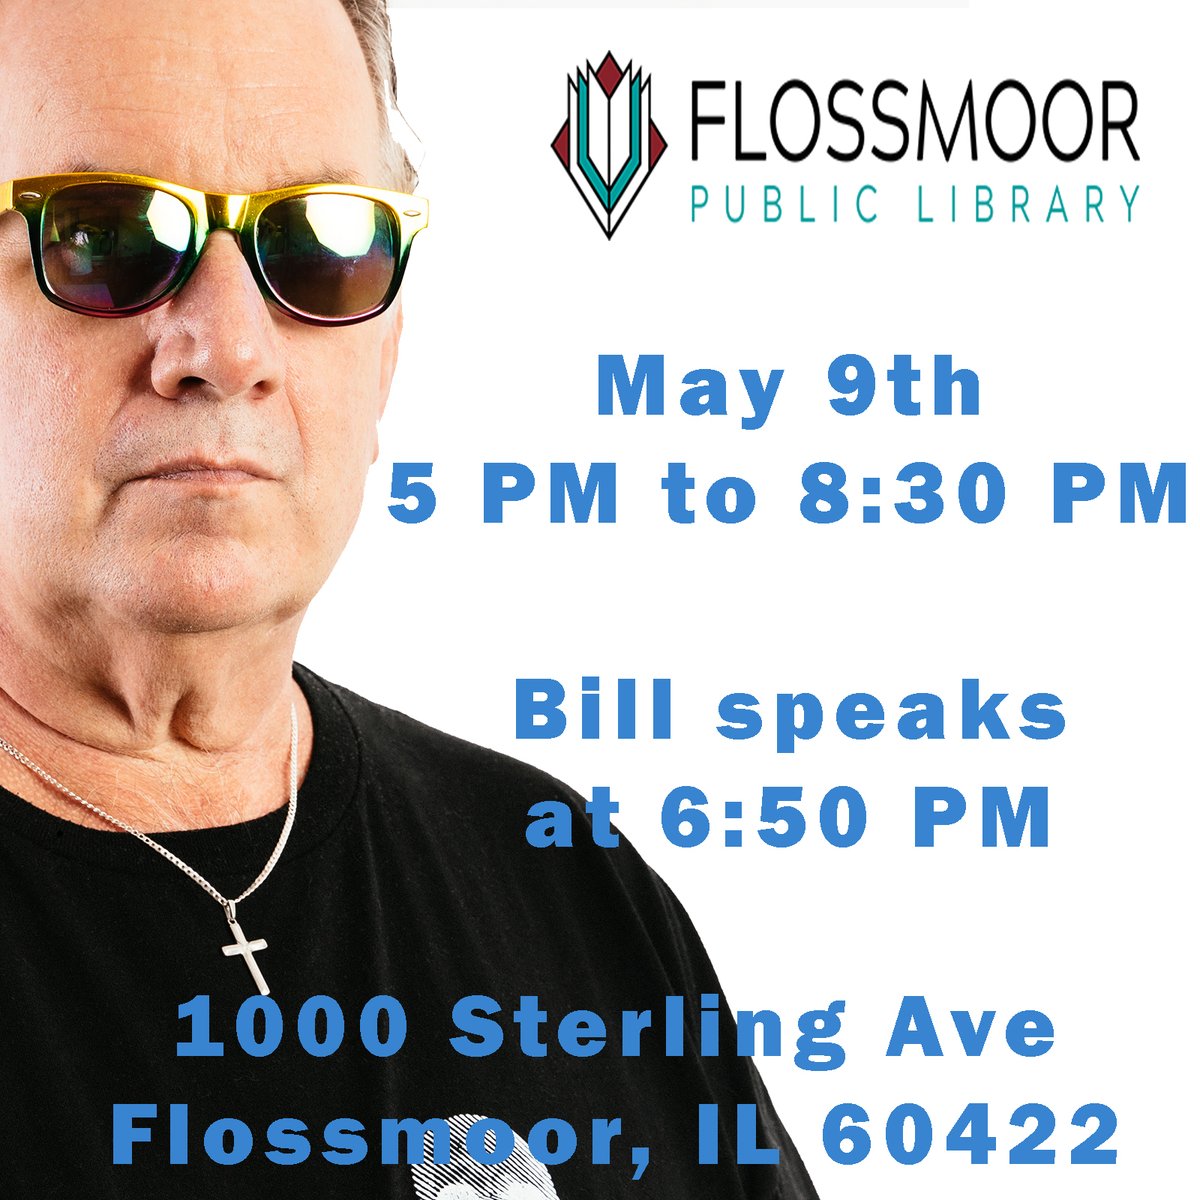 Hope to see you there. Copy and paste the address into your GPS.

Flossmoor Public Library
1000 Sterling Ave, Flossmoor, IL 60422

#scifi #scifibooks #AuthorsOfTwitter #authorpromotion #AuthorPromo